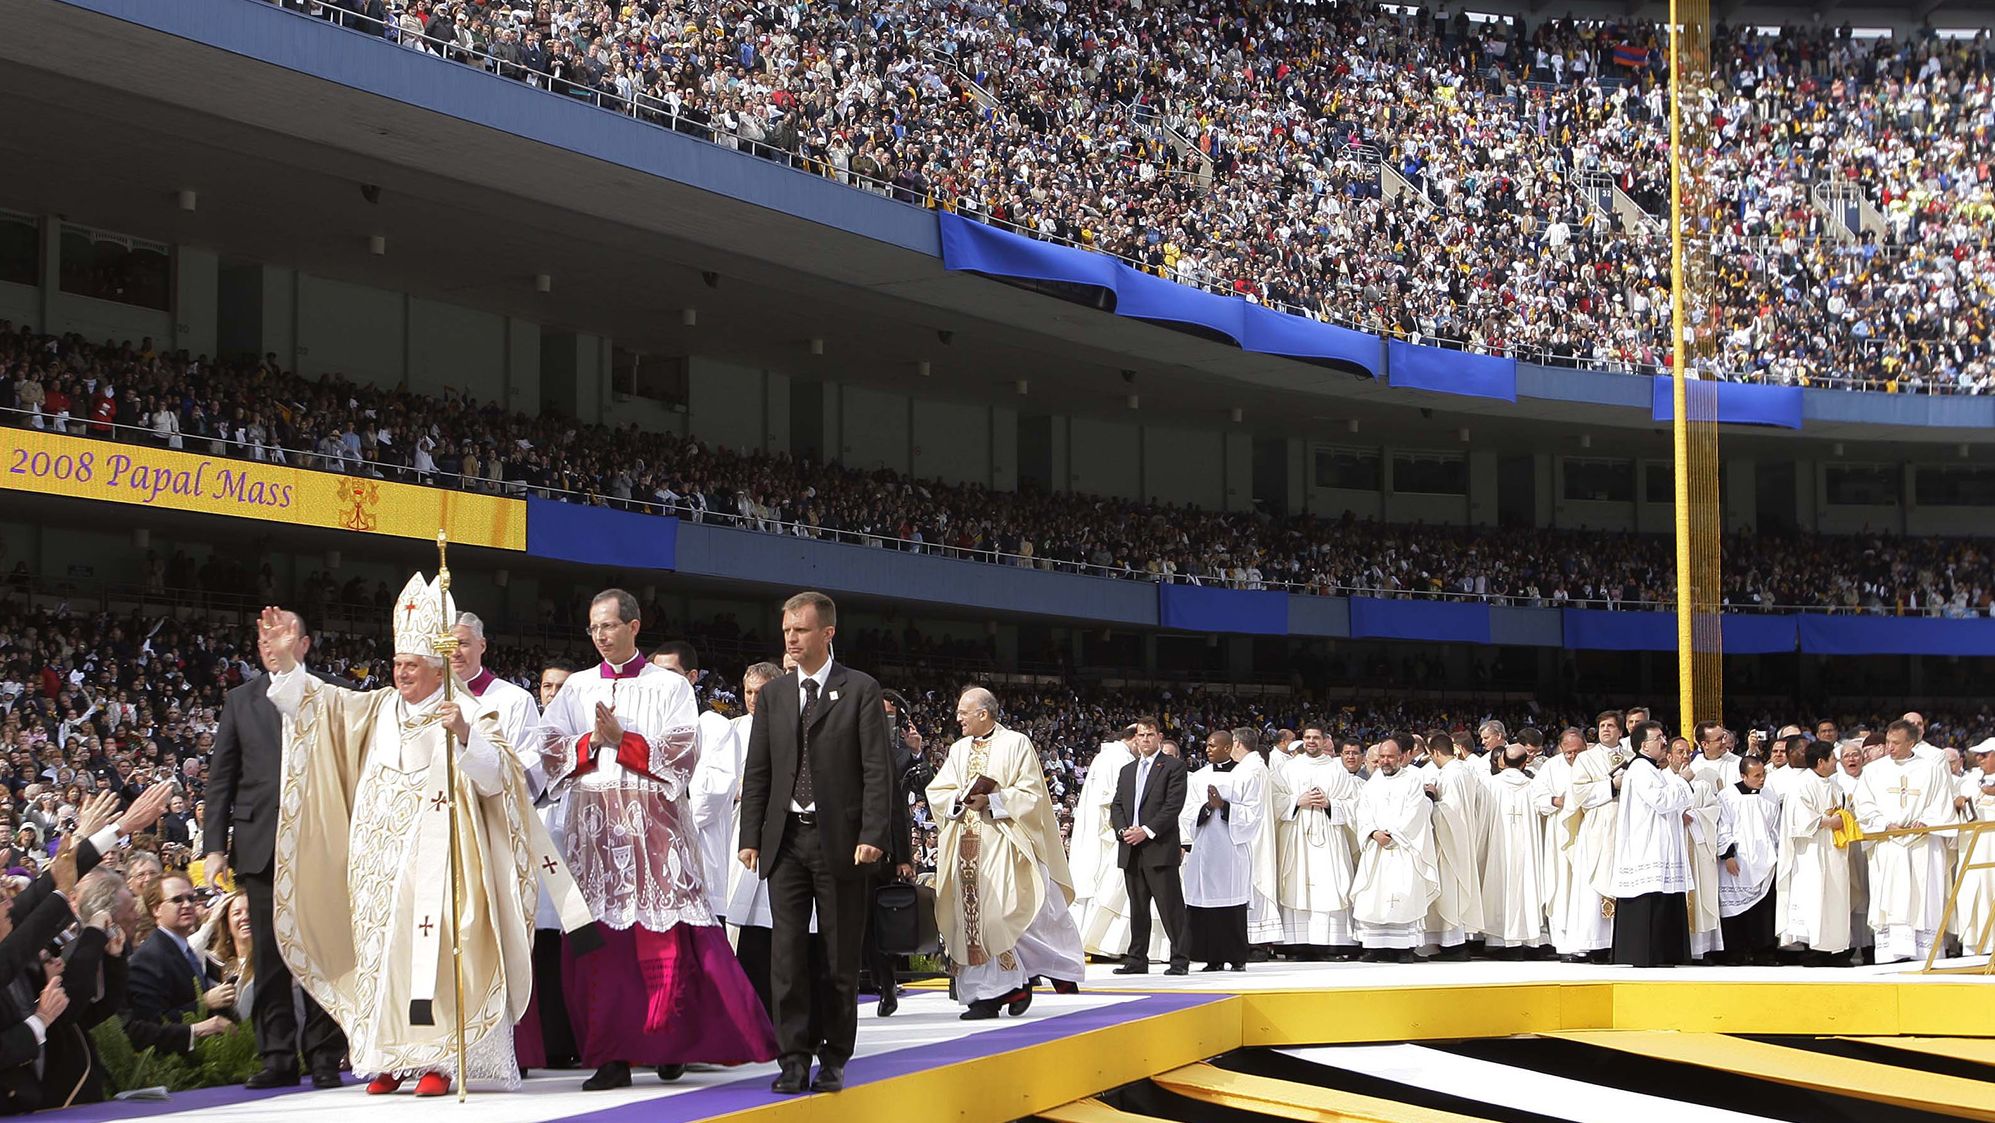 Benedict arrives to celebrate Mass at New York's Yankee Stadium in April 2008. During his trip to the United States, he also visited the White House and spoke to the United Nations General Assembly.